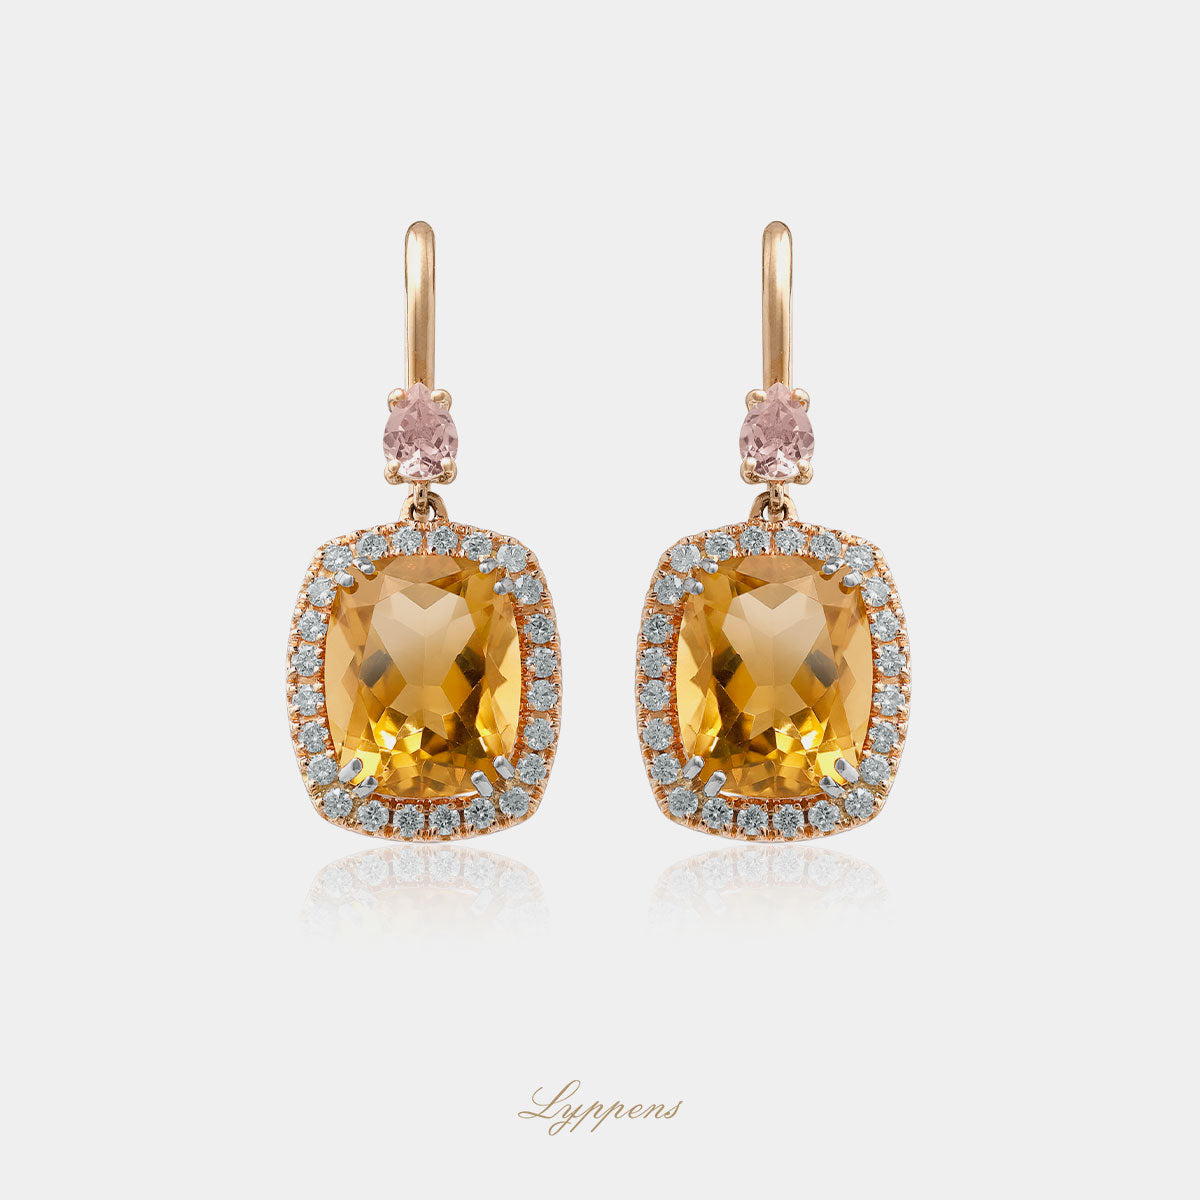 Rose gold earrings with citrine, morganite and diamonds